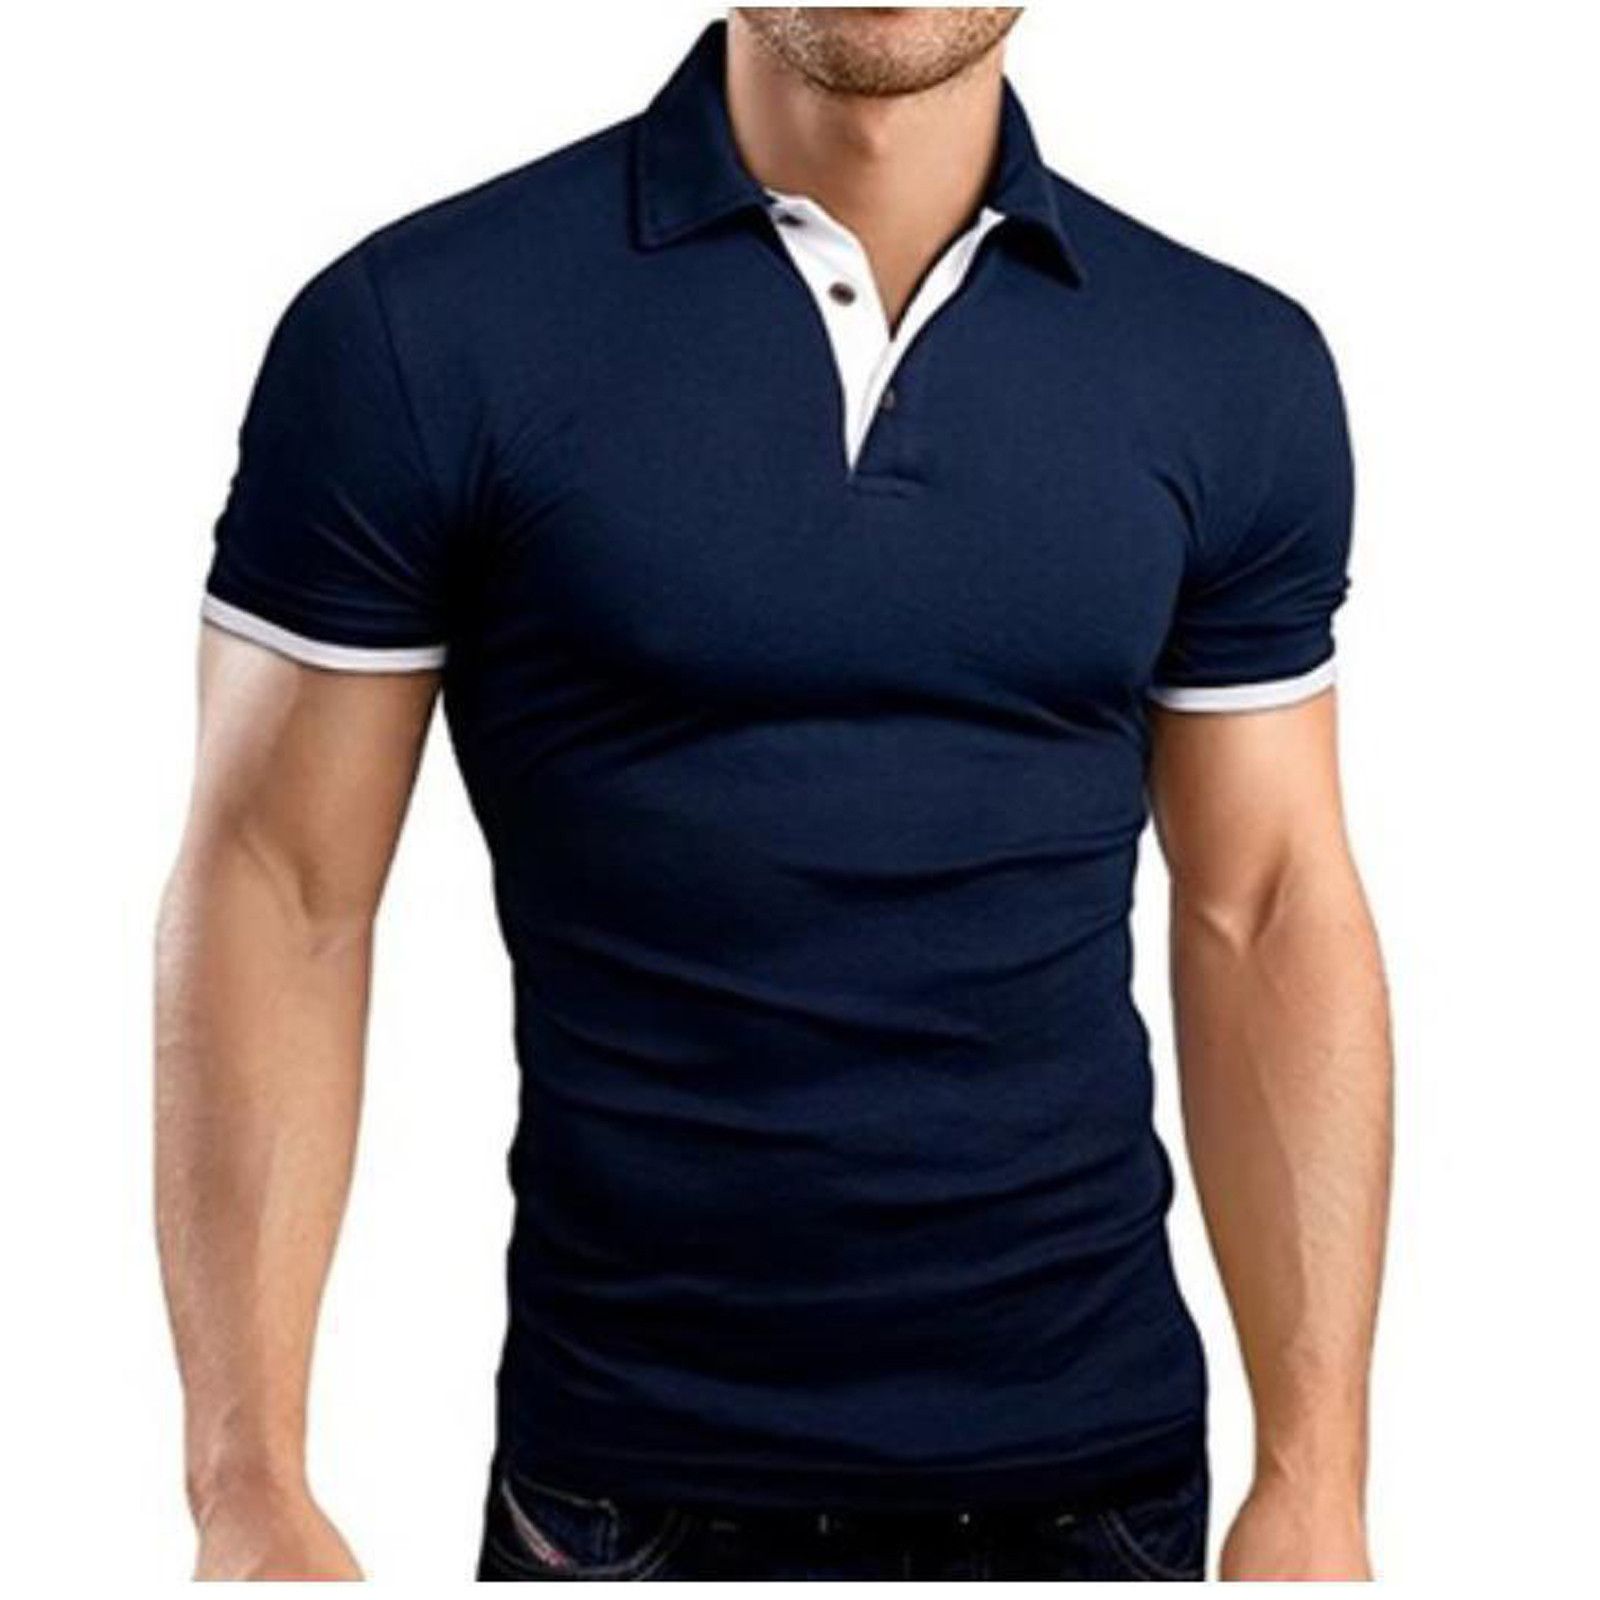 Get Noticed in These Sexy US Polo T-Shirts for Men